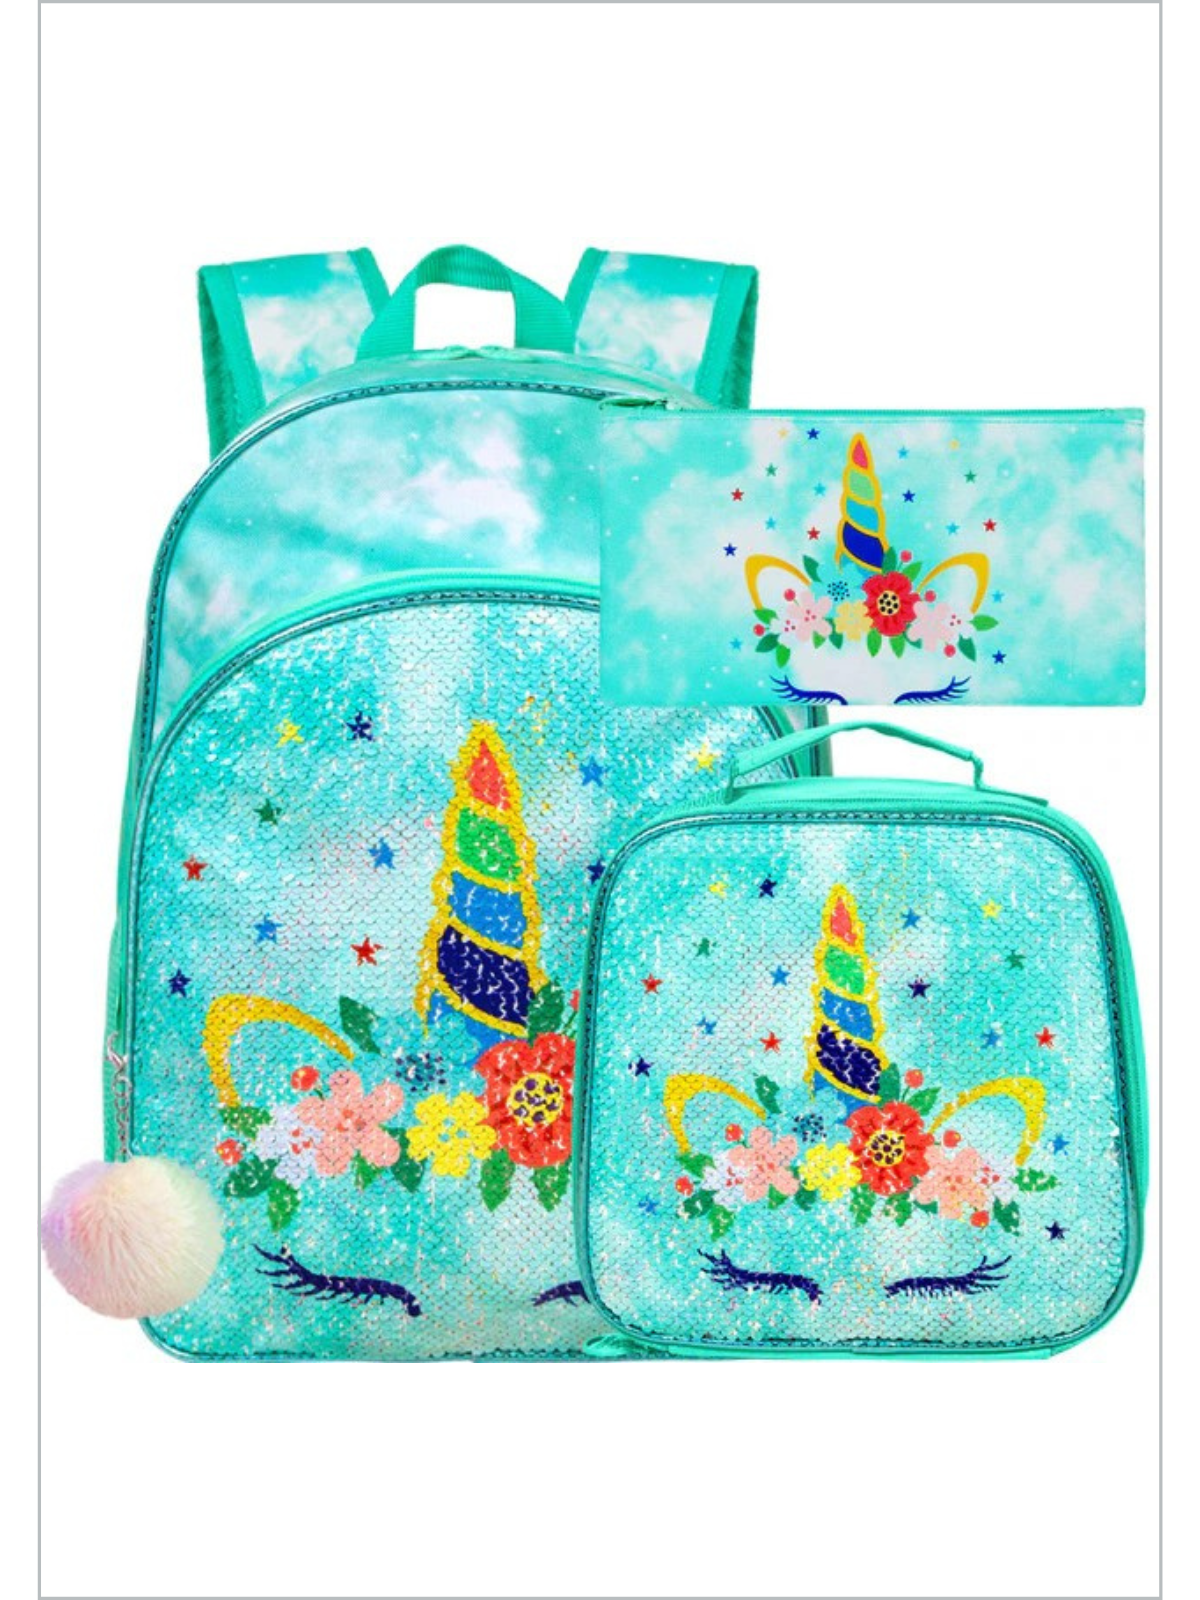 Back To School Accessories | Backpack & Lunchbox Set | Mia Belle Girls